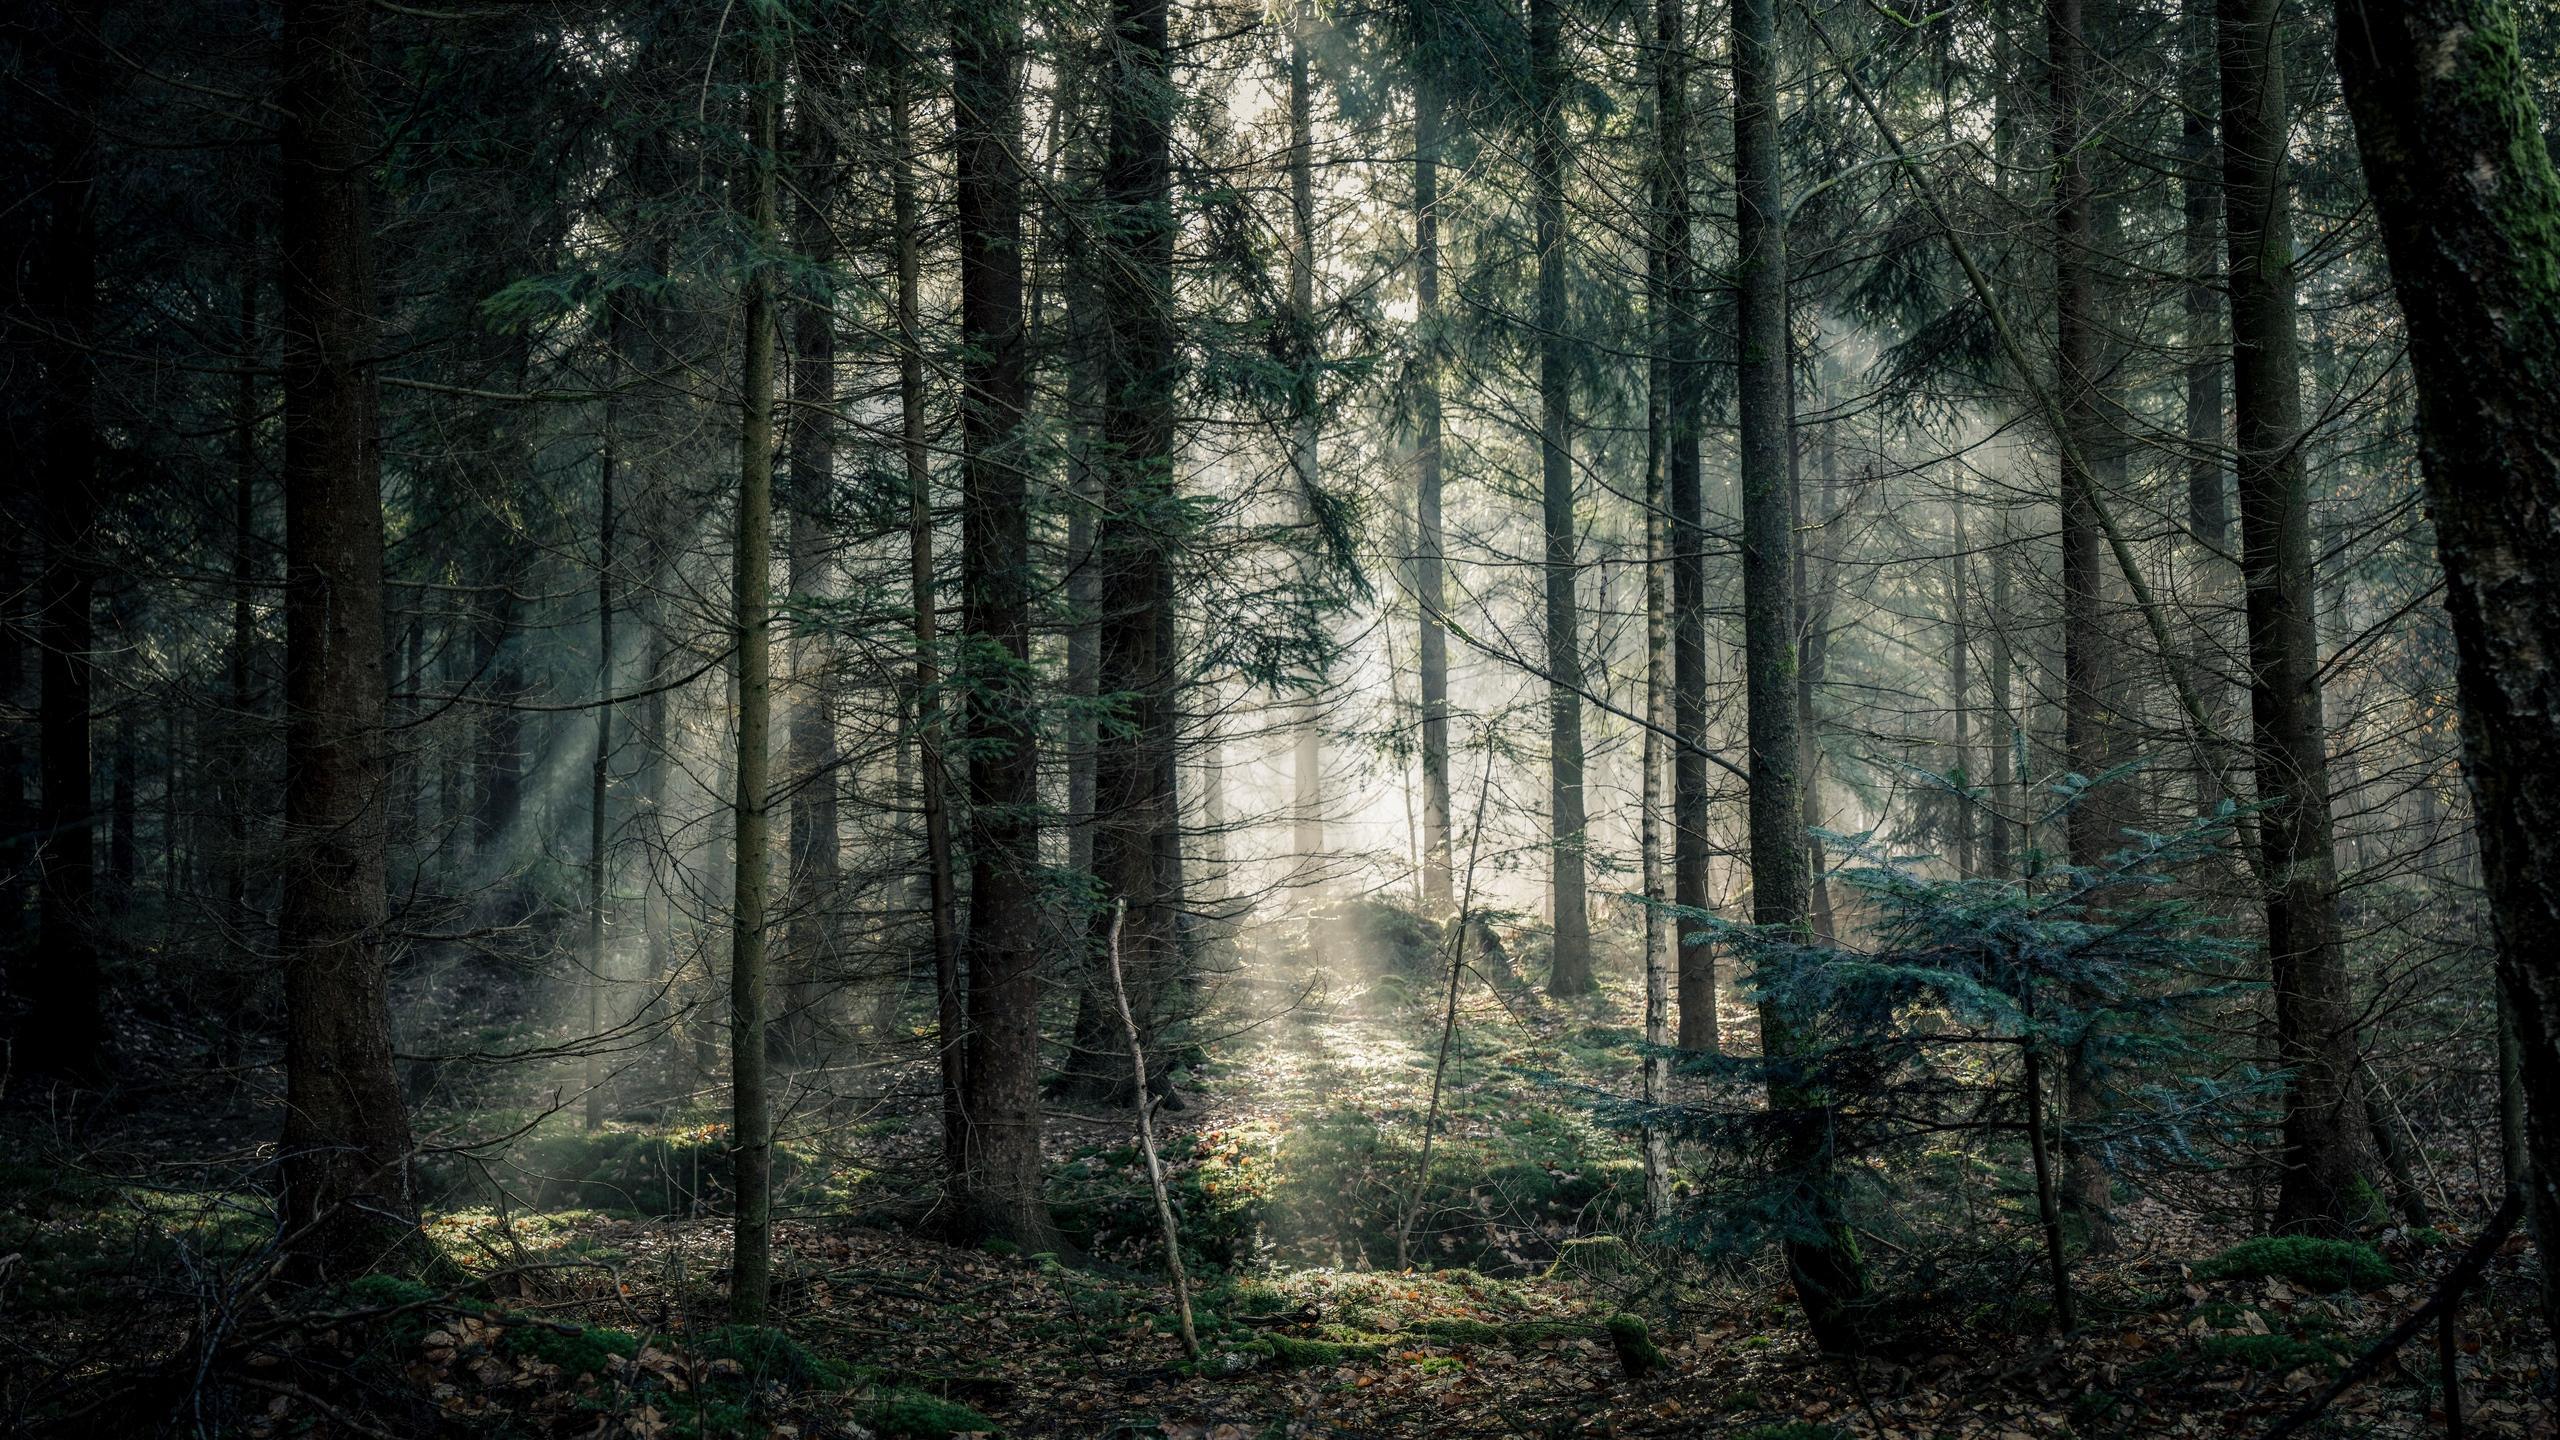 Download wallpaper 2560x1440 forest, fog, trees, branches, light